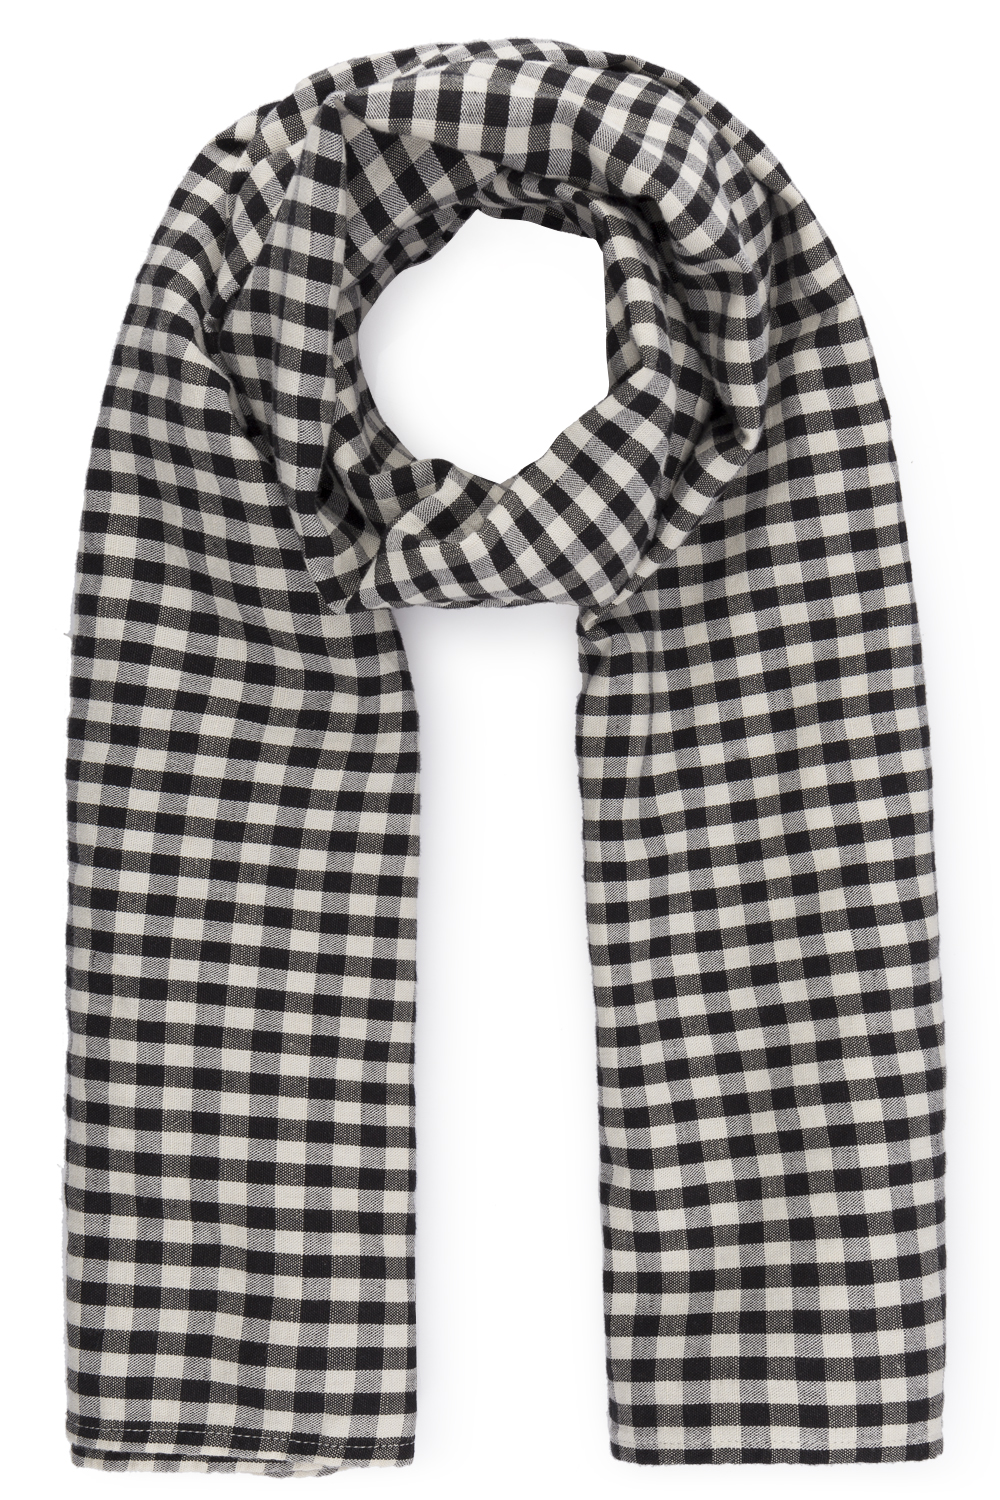 little creative factory Black and White Checked Scarf